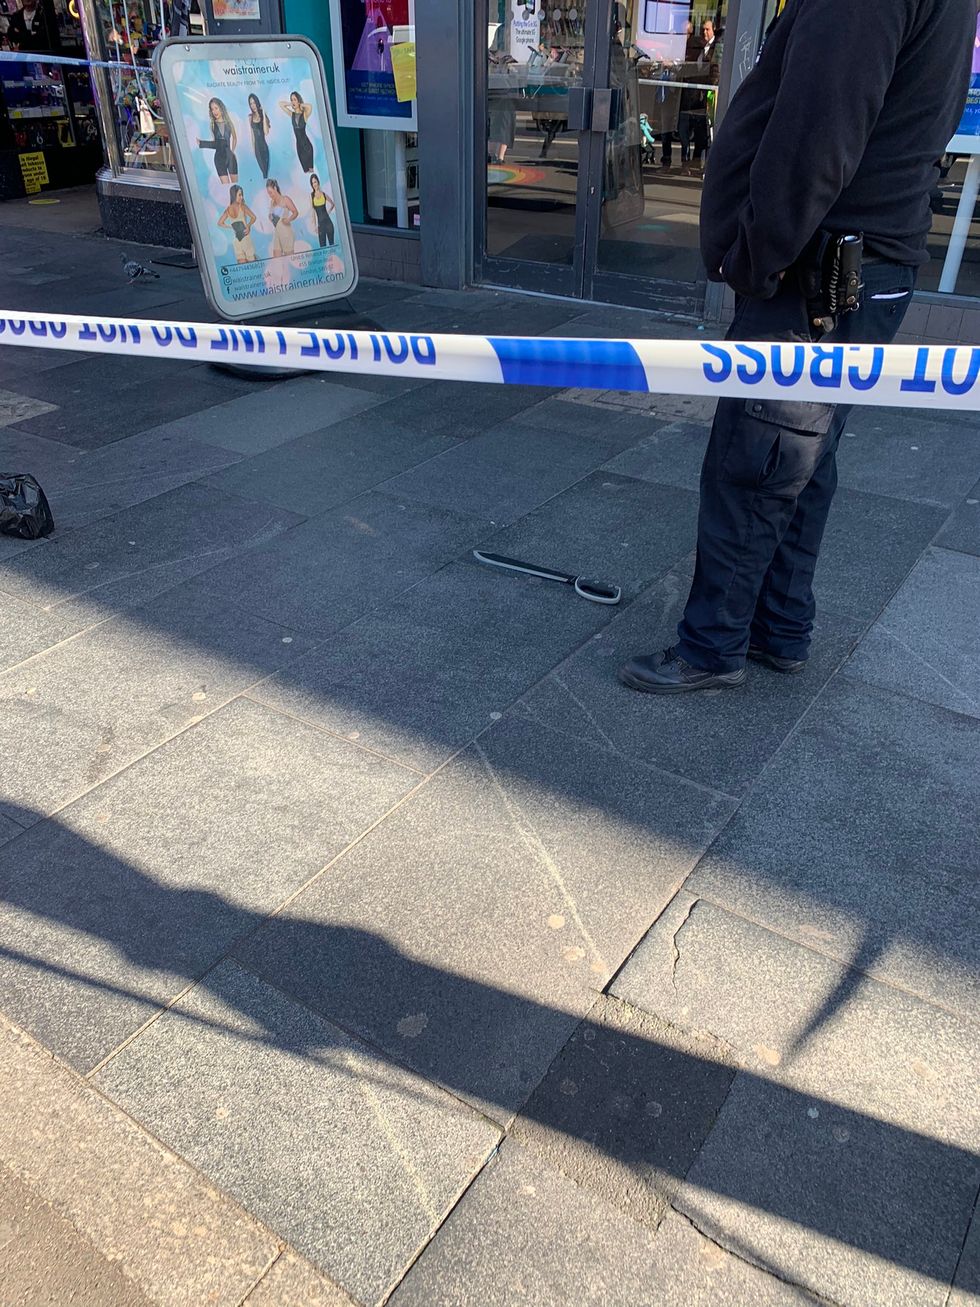 Large knife in central Brixton